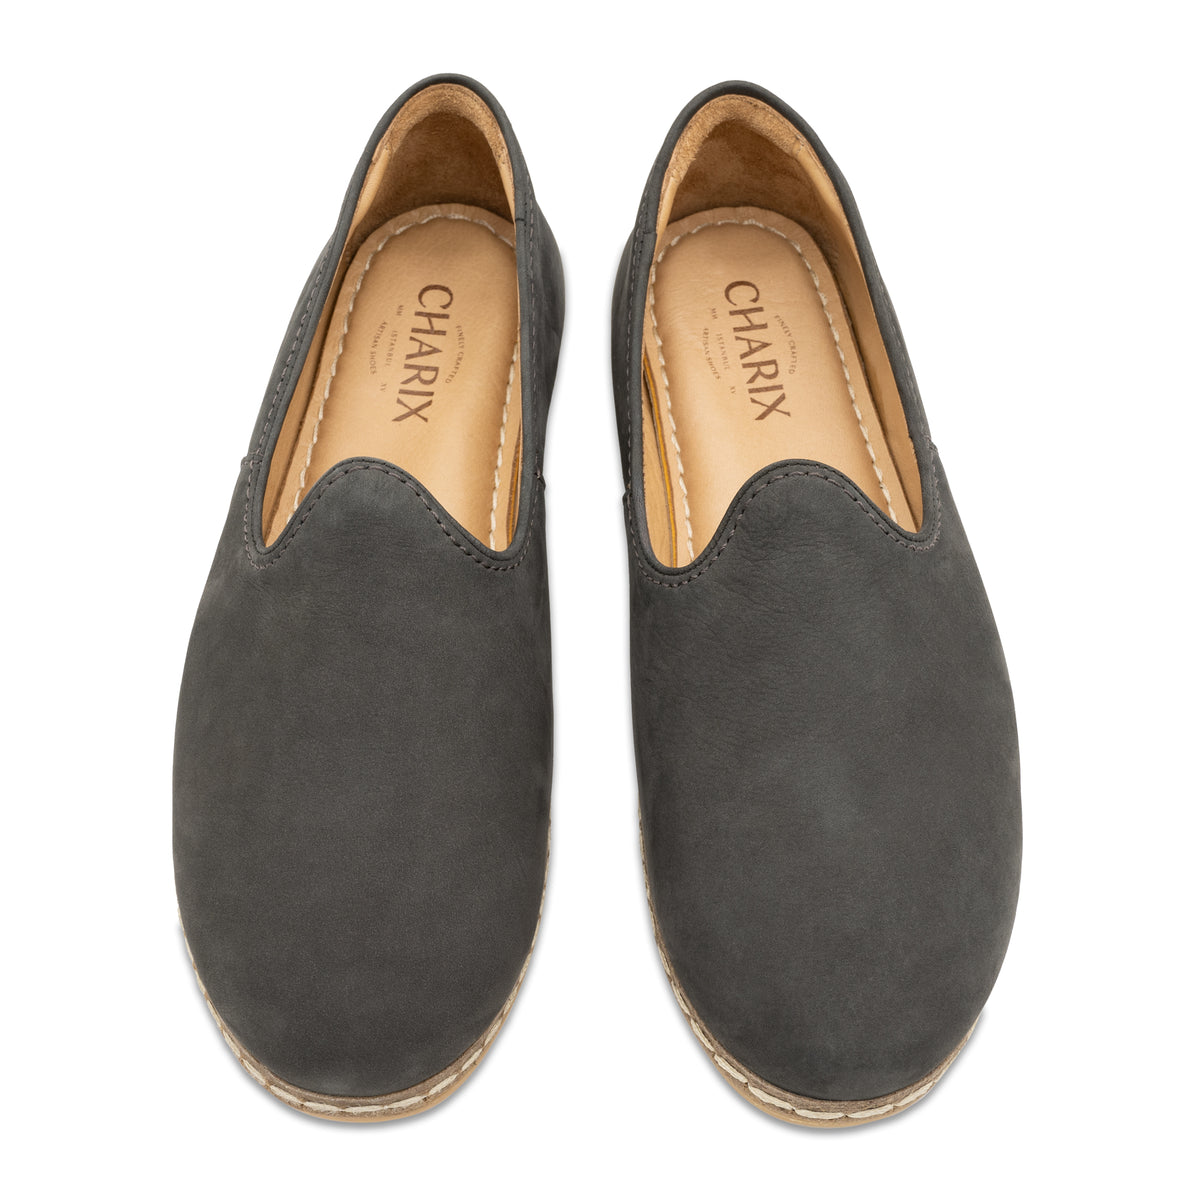 Graphite Suede Slip Ons for Men - Charix Shoes